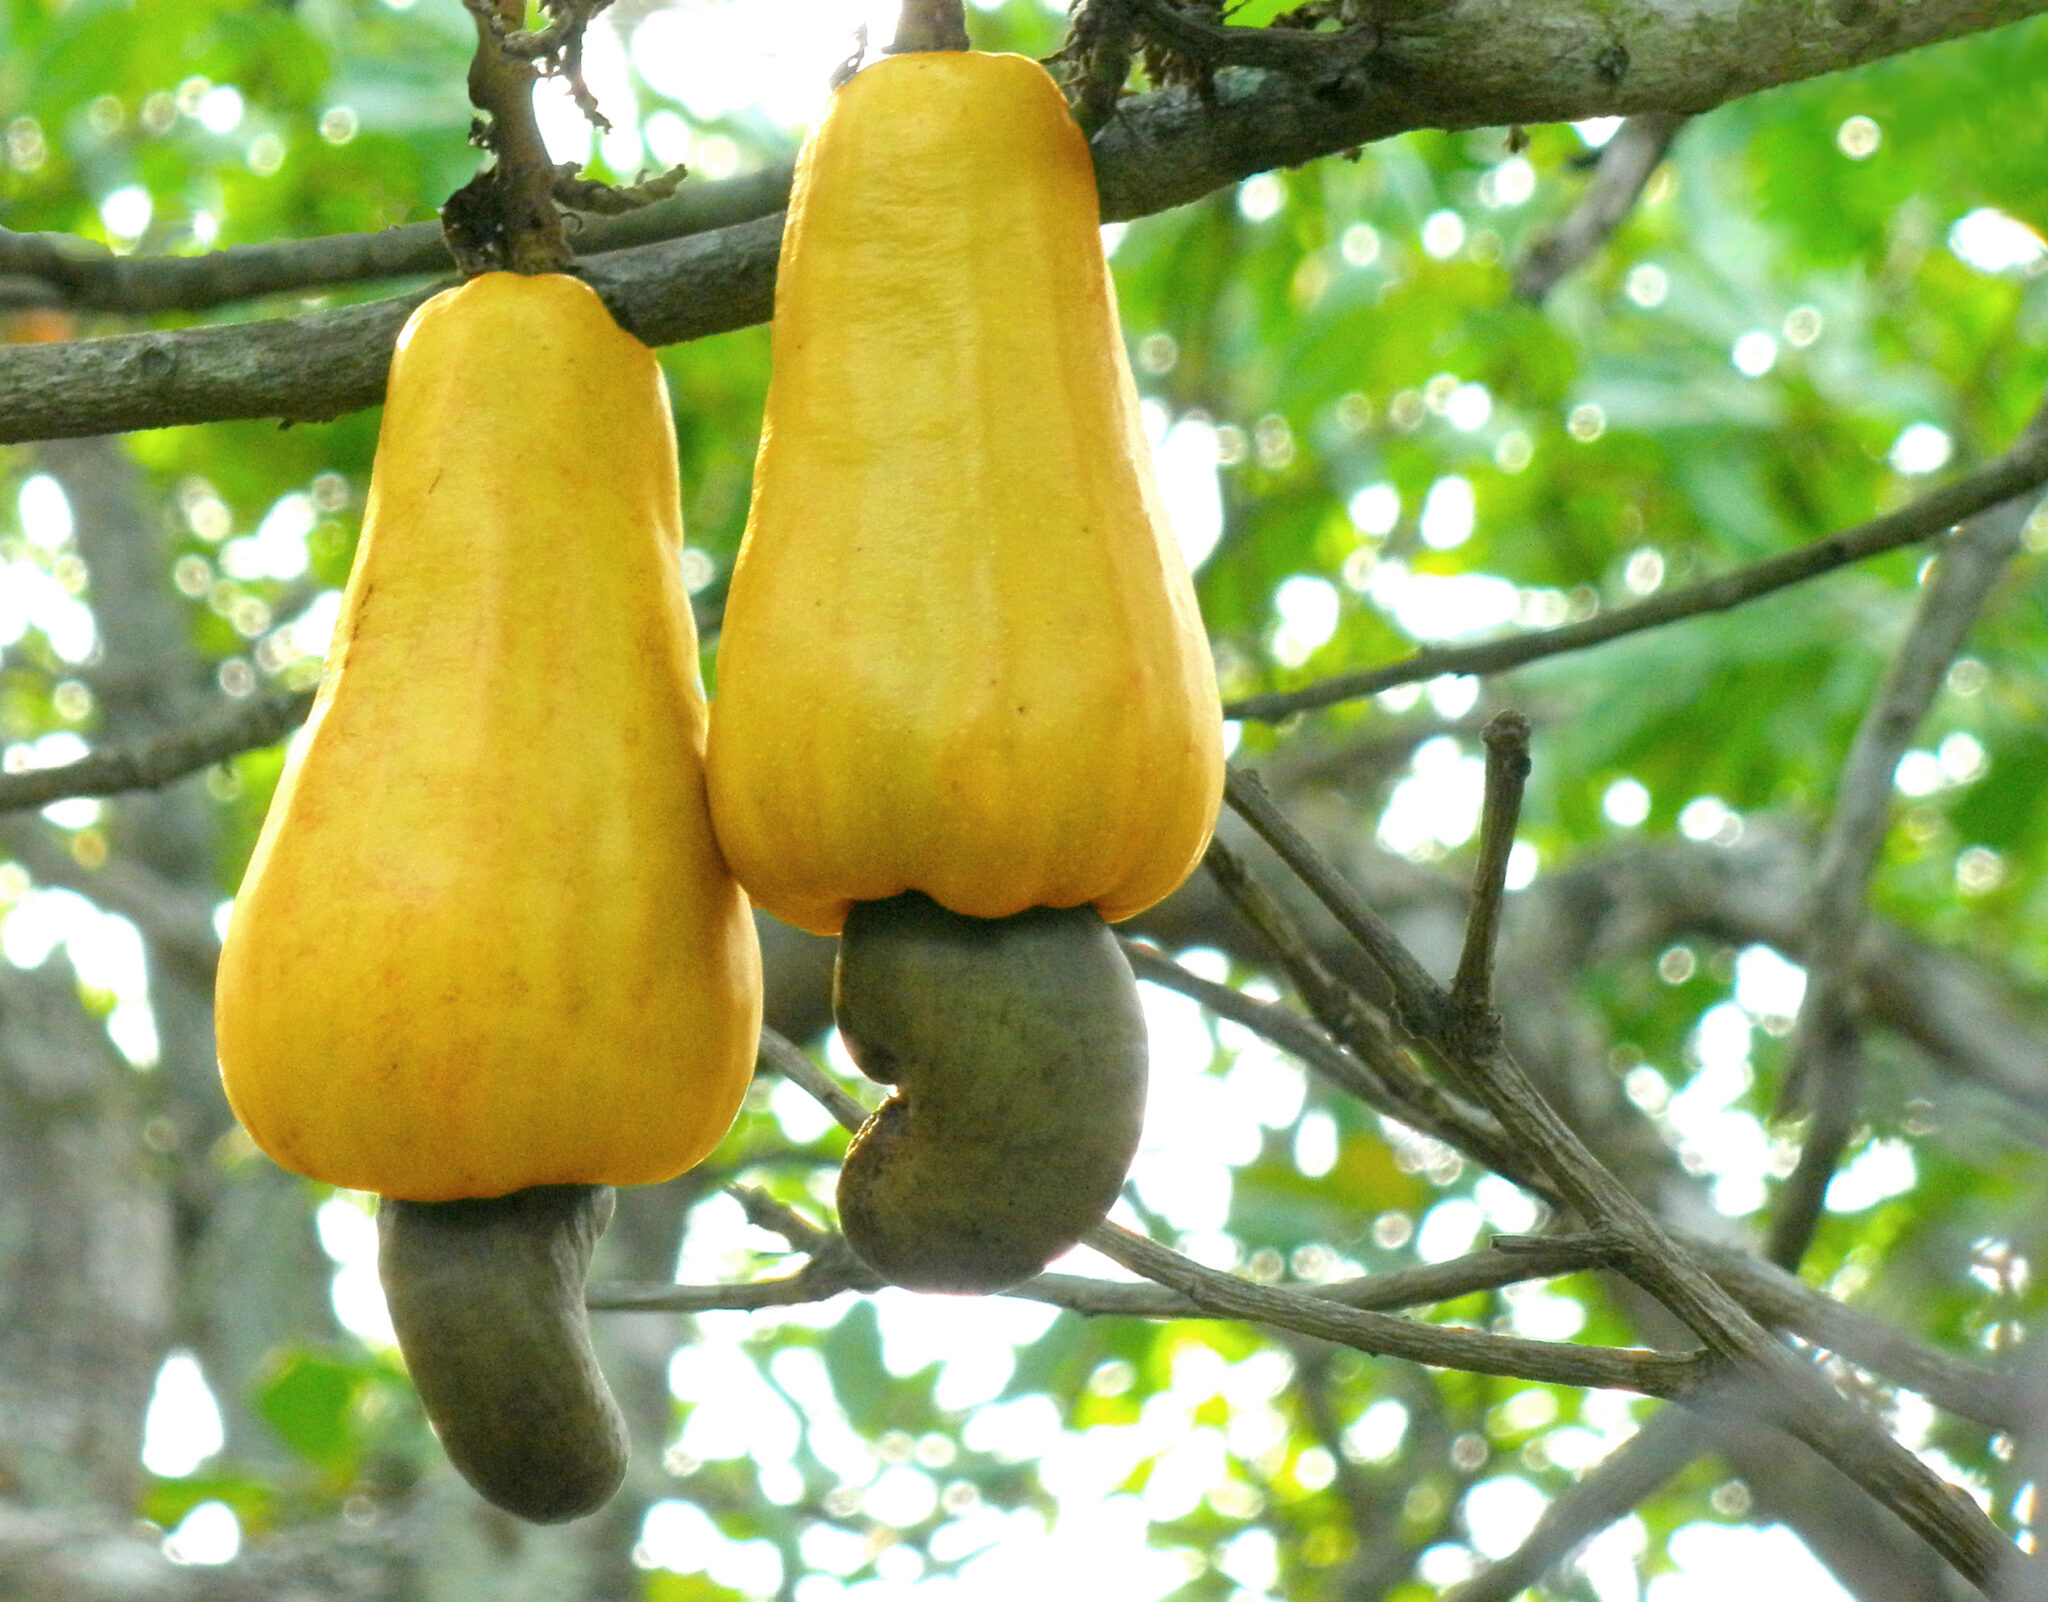 where do cashew nuts come from and why are raw cashew nuts poisonous